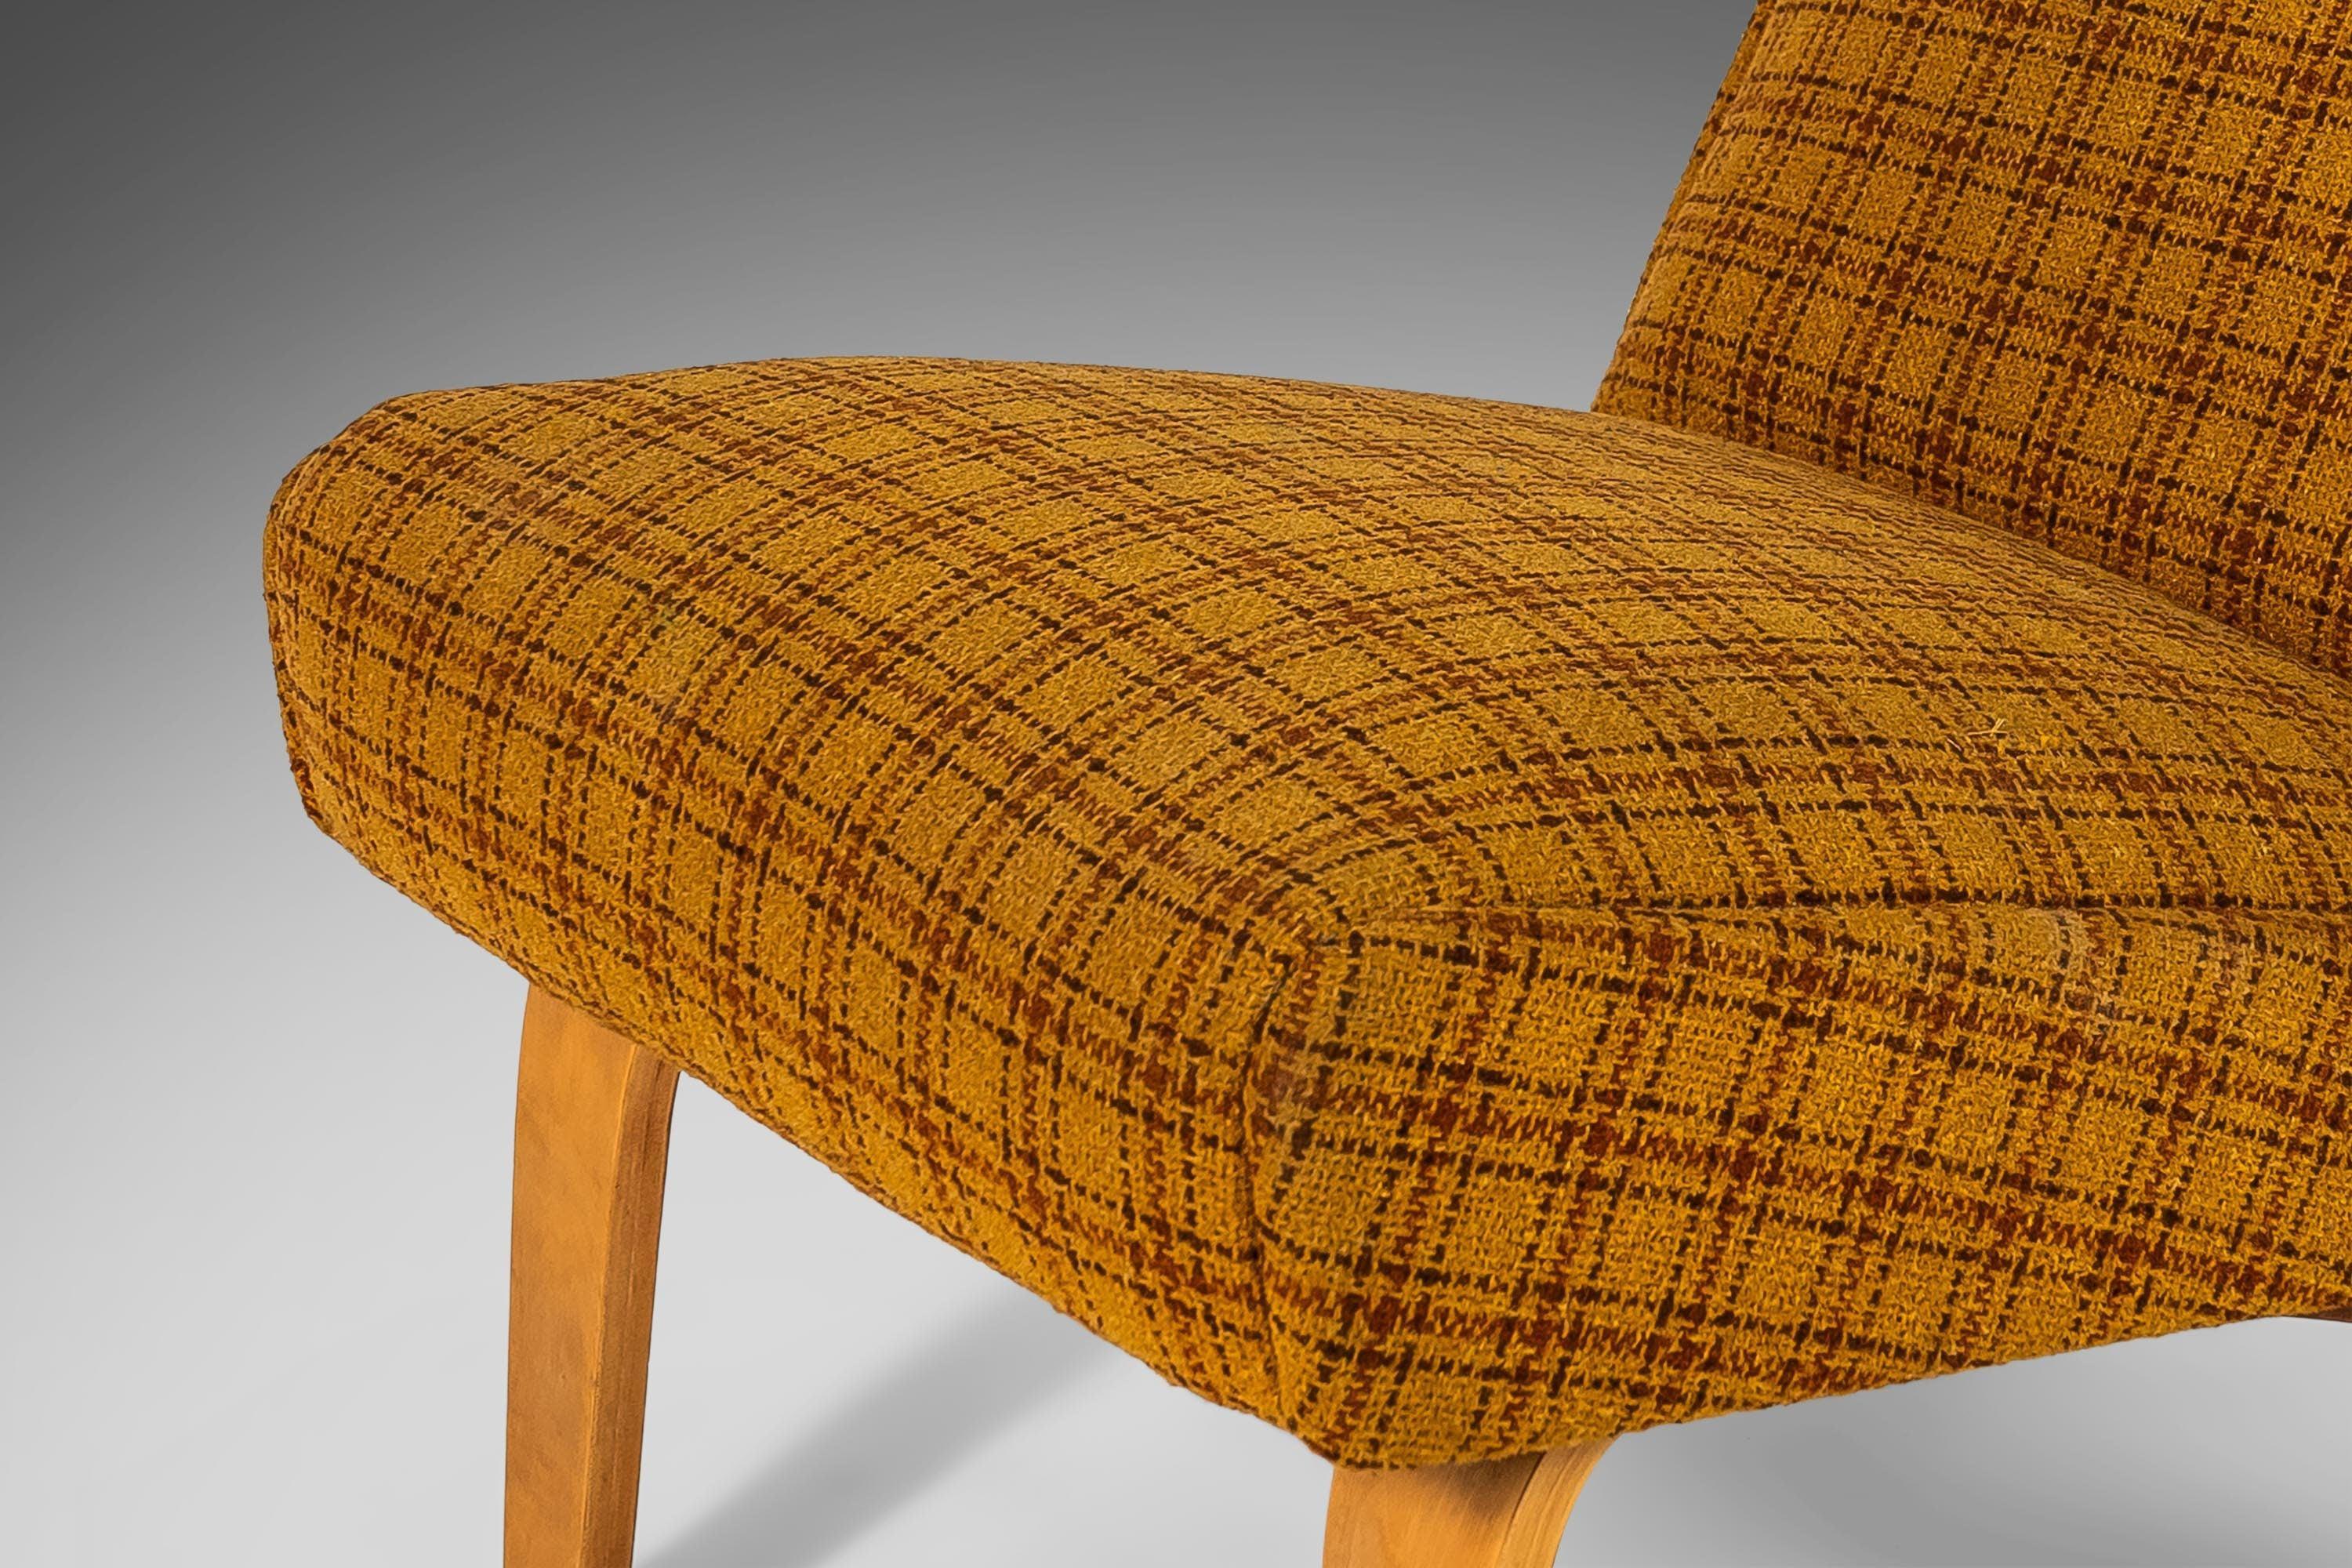 Comfort. Vintage fabric. Captivating bentwood legs. These four slipper chairs are the perfect addition to any space needing a pop of color or a minimal footprint. The original yellow plaid upholstery gives these splendid chairs tons of character and